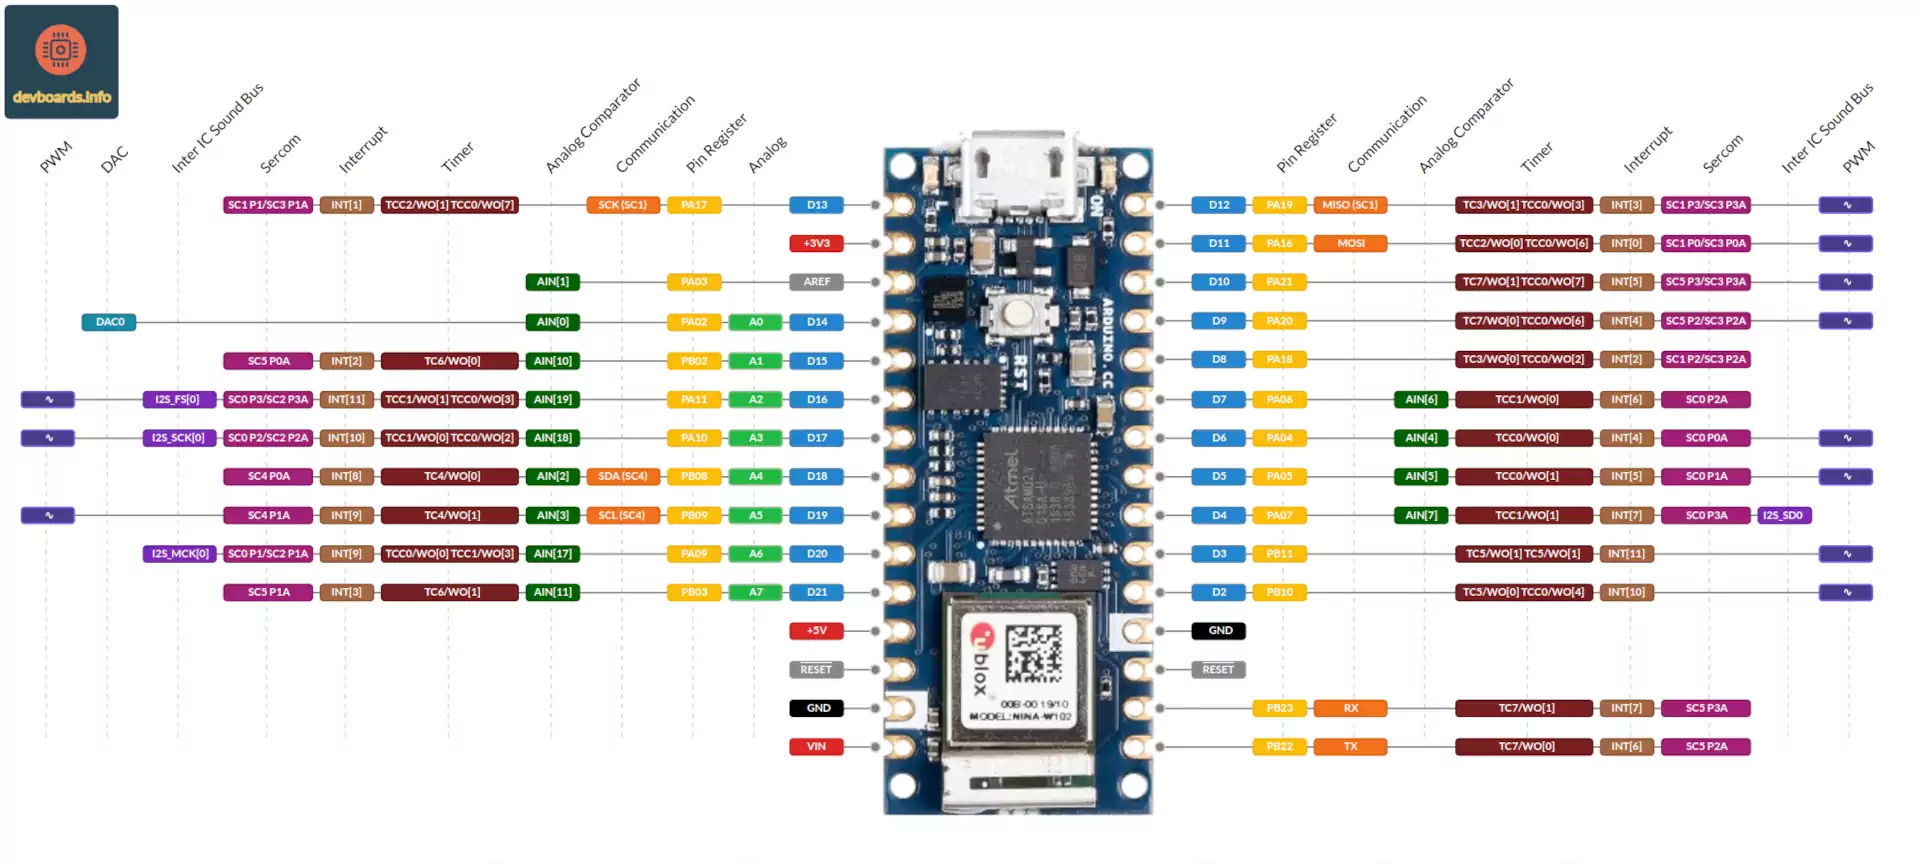 Arduino Nano 33 IoT Pinout and Specification - devboards.info